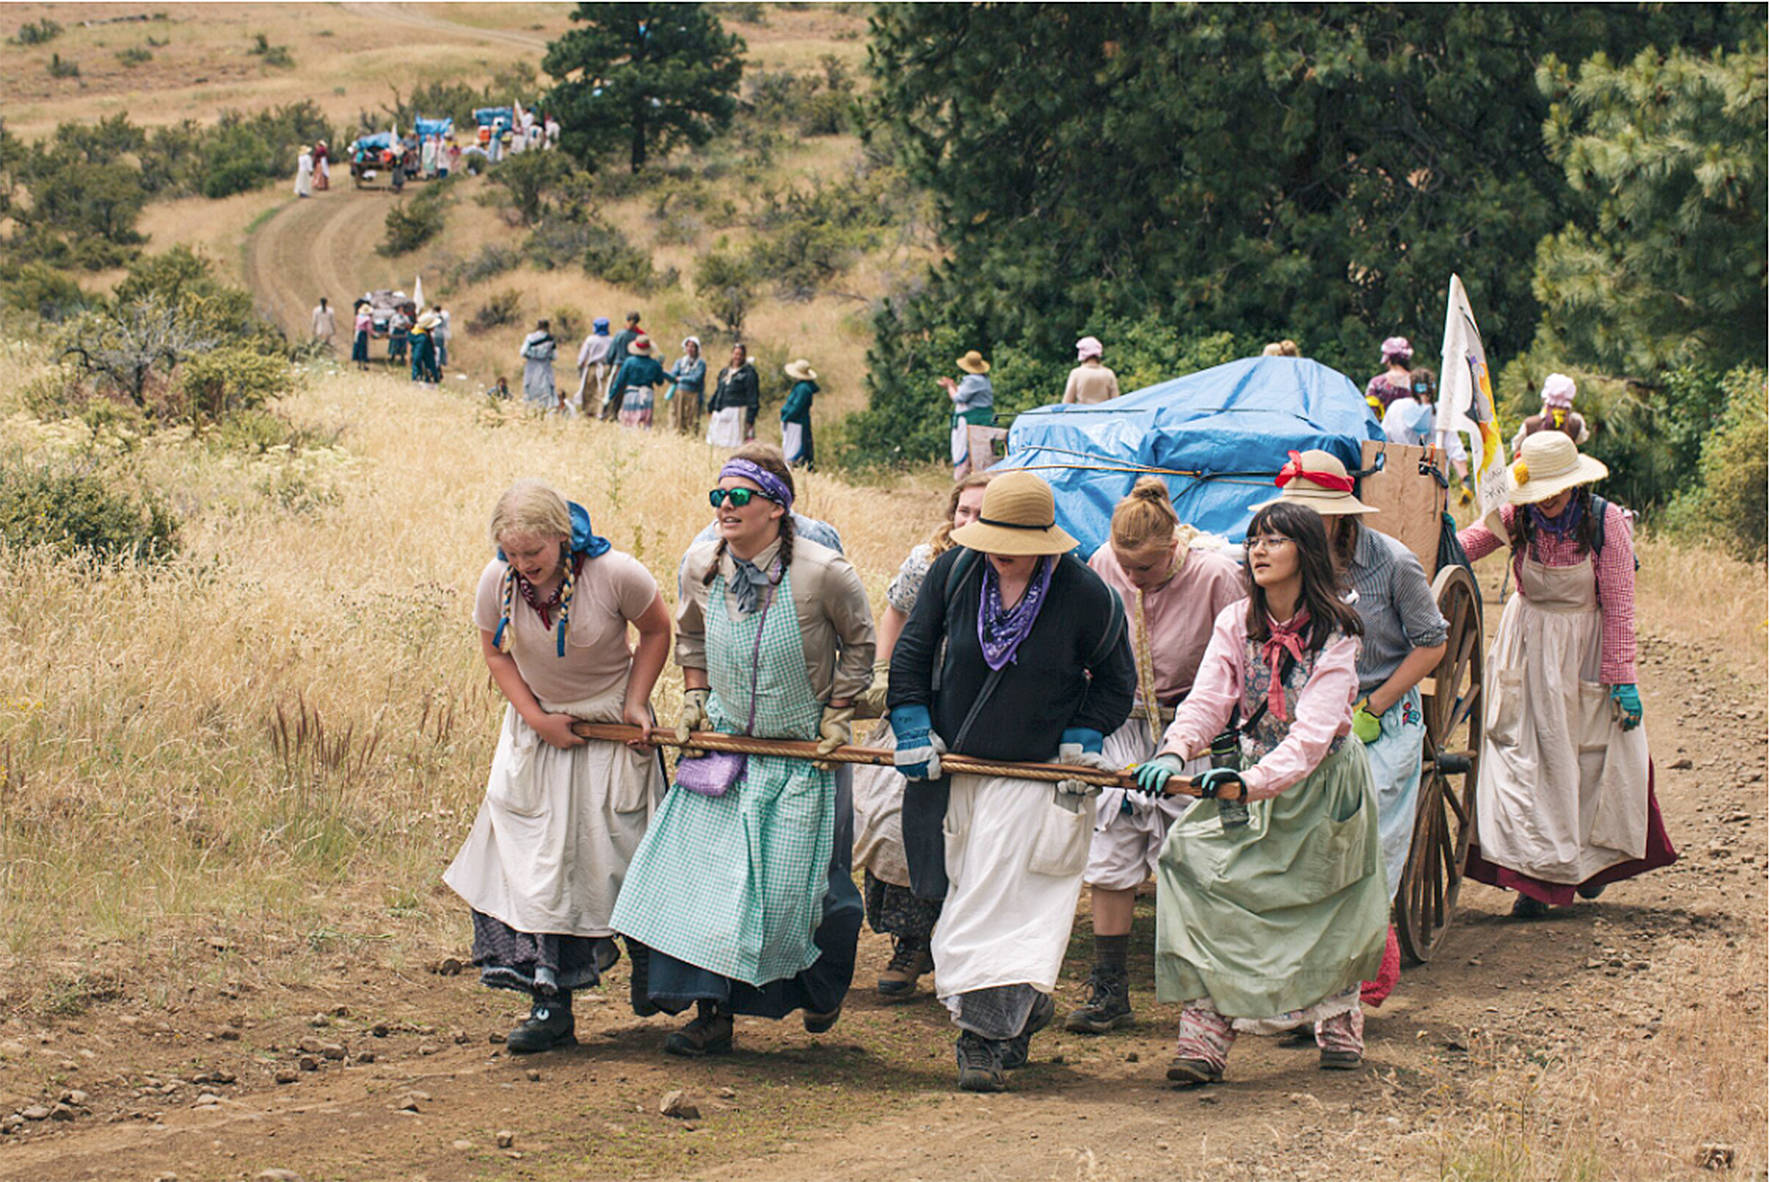 Local church group reenacts families’ pilgrimage